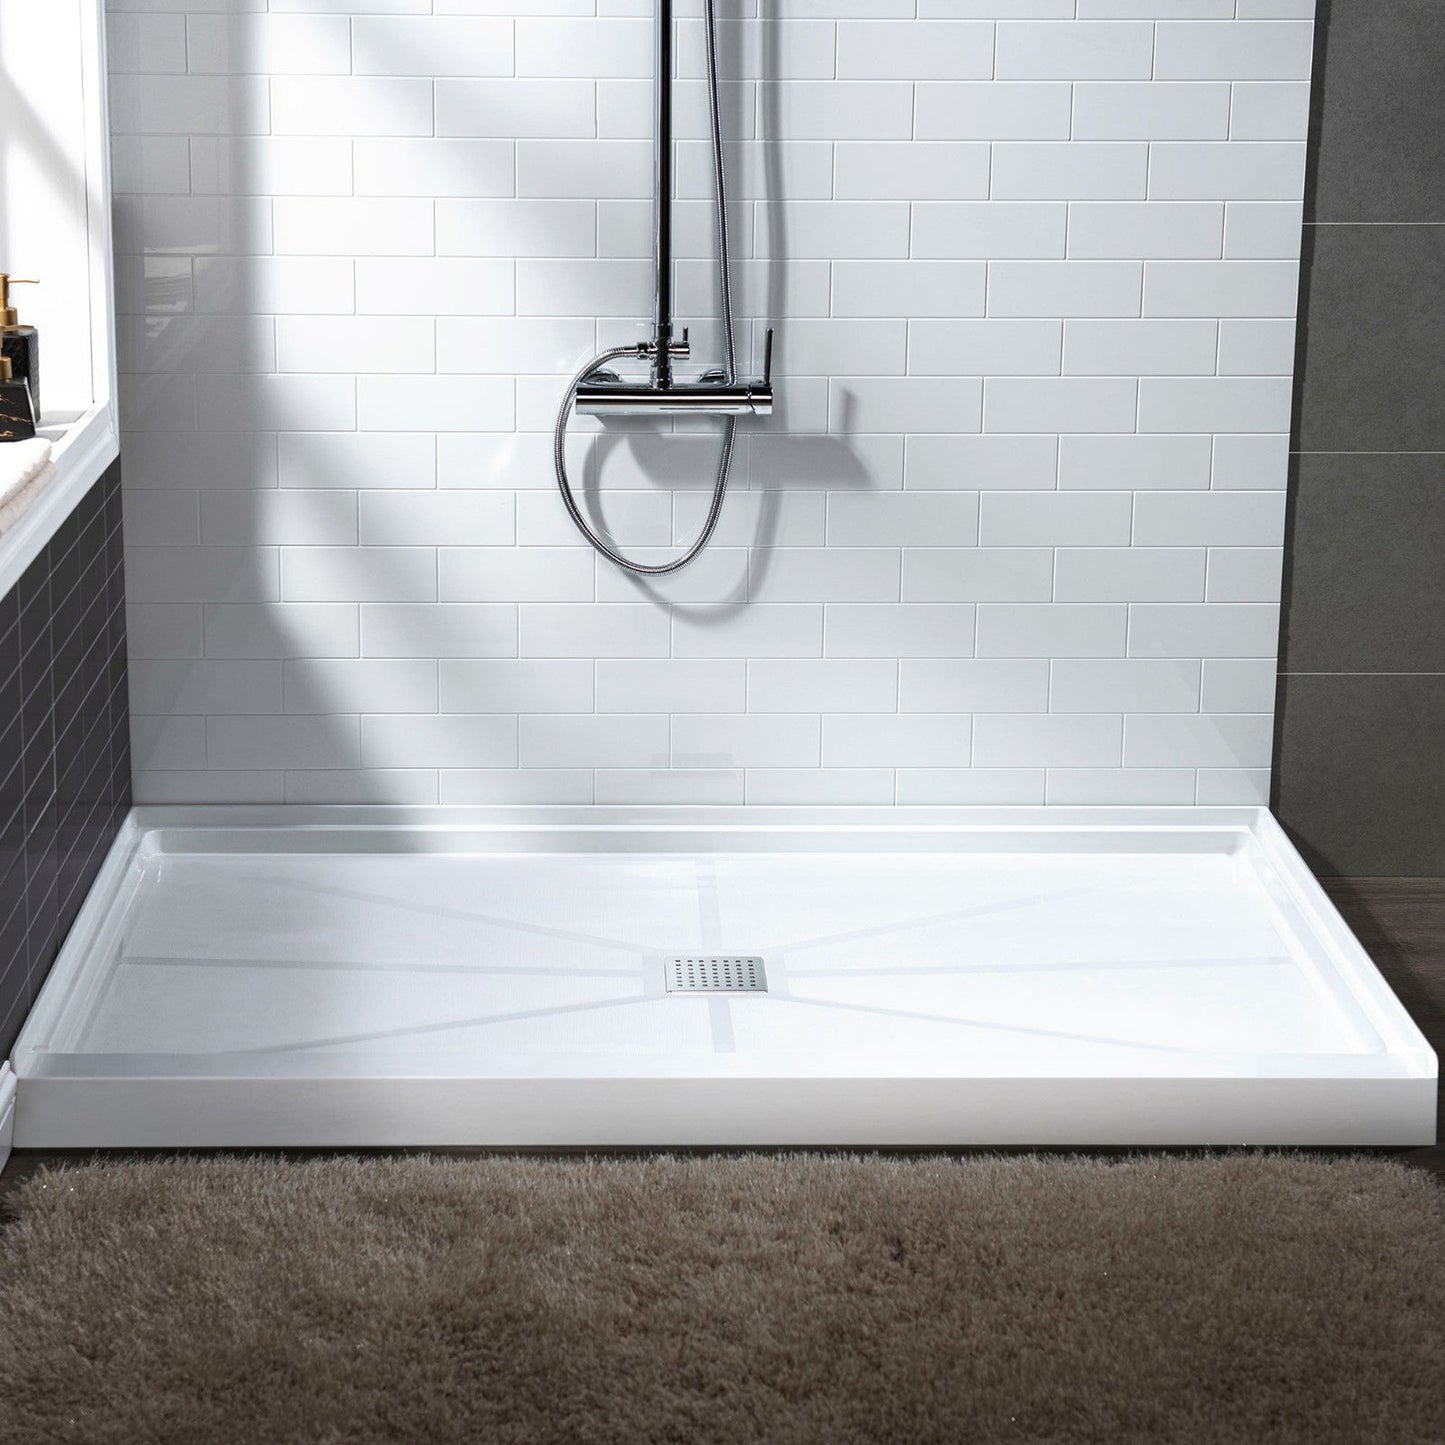 WoodBridge 60" x 30" White Solid Surface Shower Base Center Drain Location With Chrome Trench Drain Cover